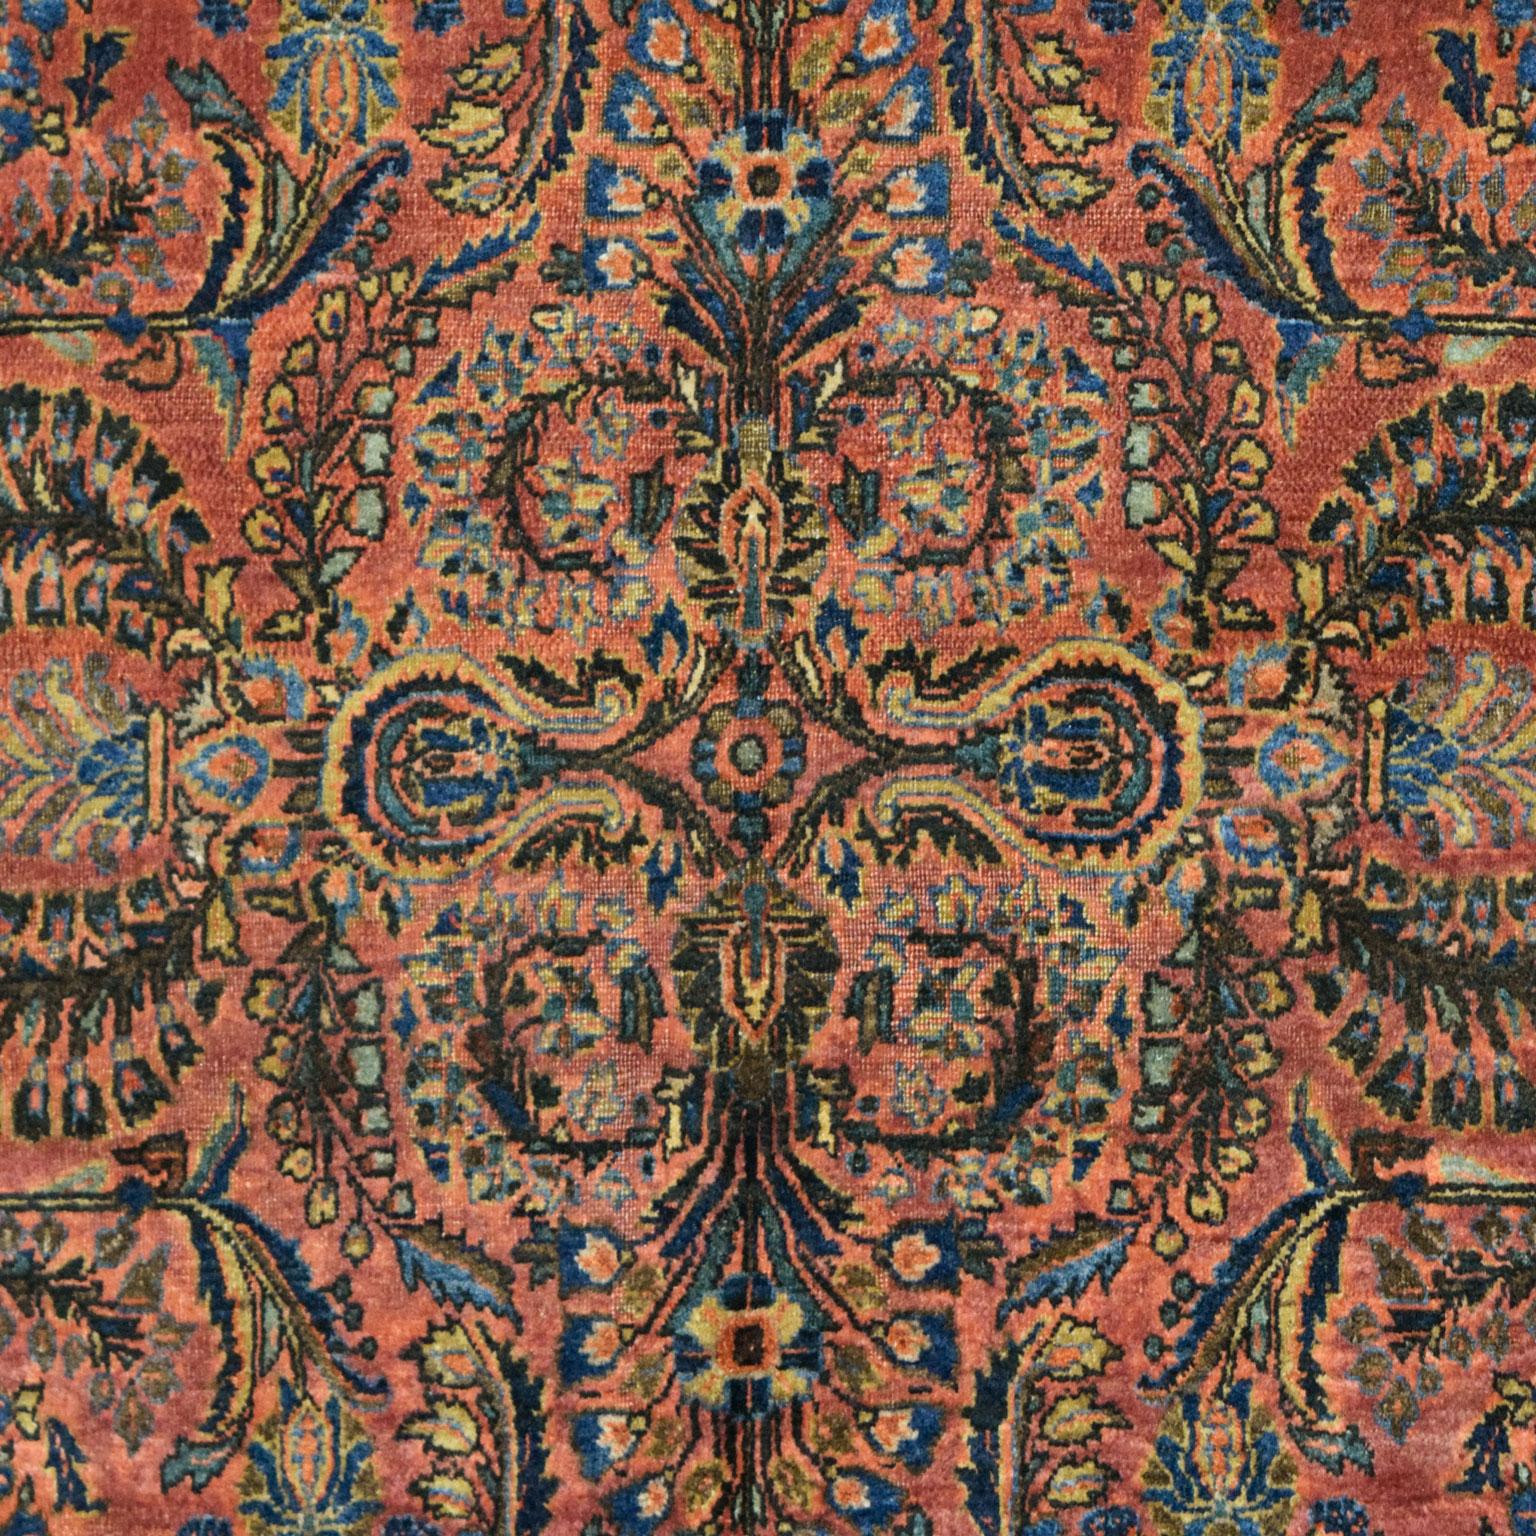 Woven in Iran, this hand-knotted Sarouk carpet measures 4’ x 6’5” and belongs to the Antique Collection. Crafted using a traditional Persian weave, this antique Sarouk has a soft pile and a durable foundation. The carpet’s rich red background, along